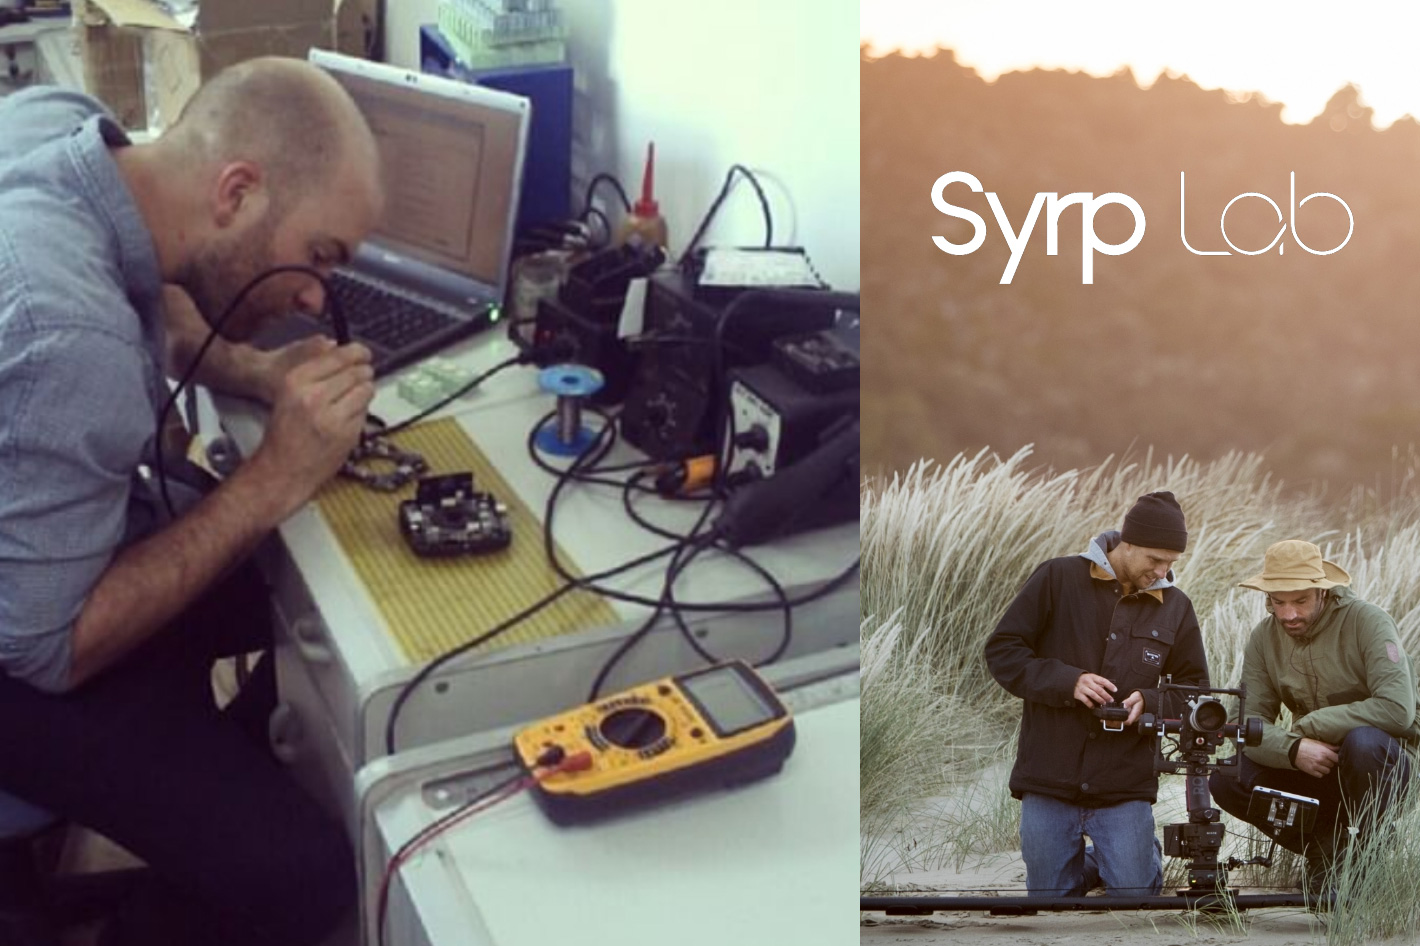 Syrp Lab: building the next generation of tools for creators